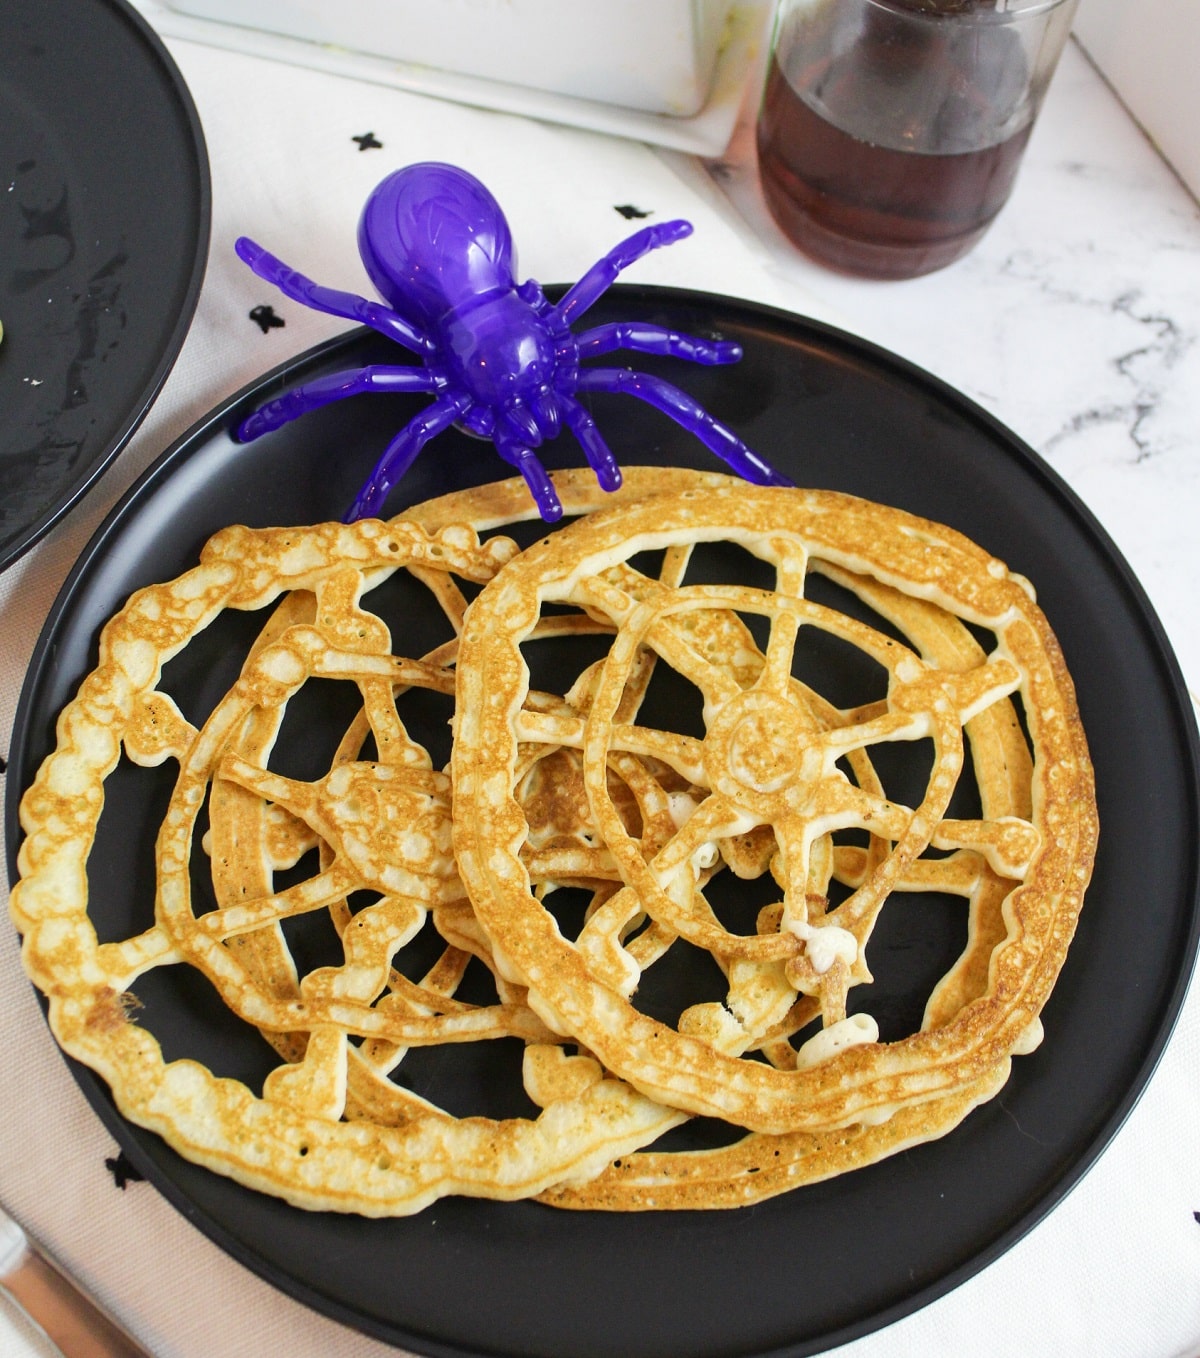 pancakes shaped like a round spider web with a plastic purple spider on the side.